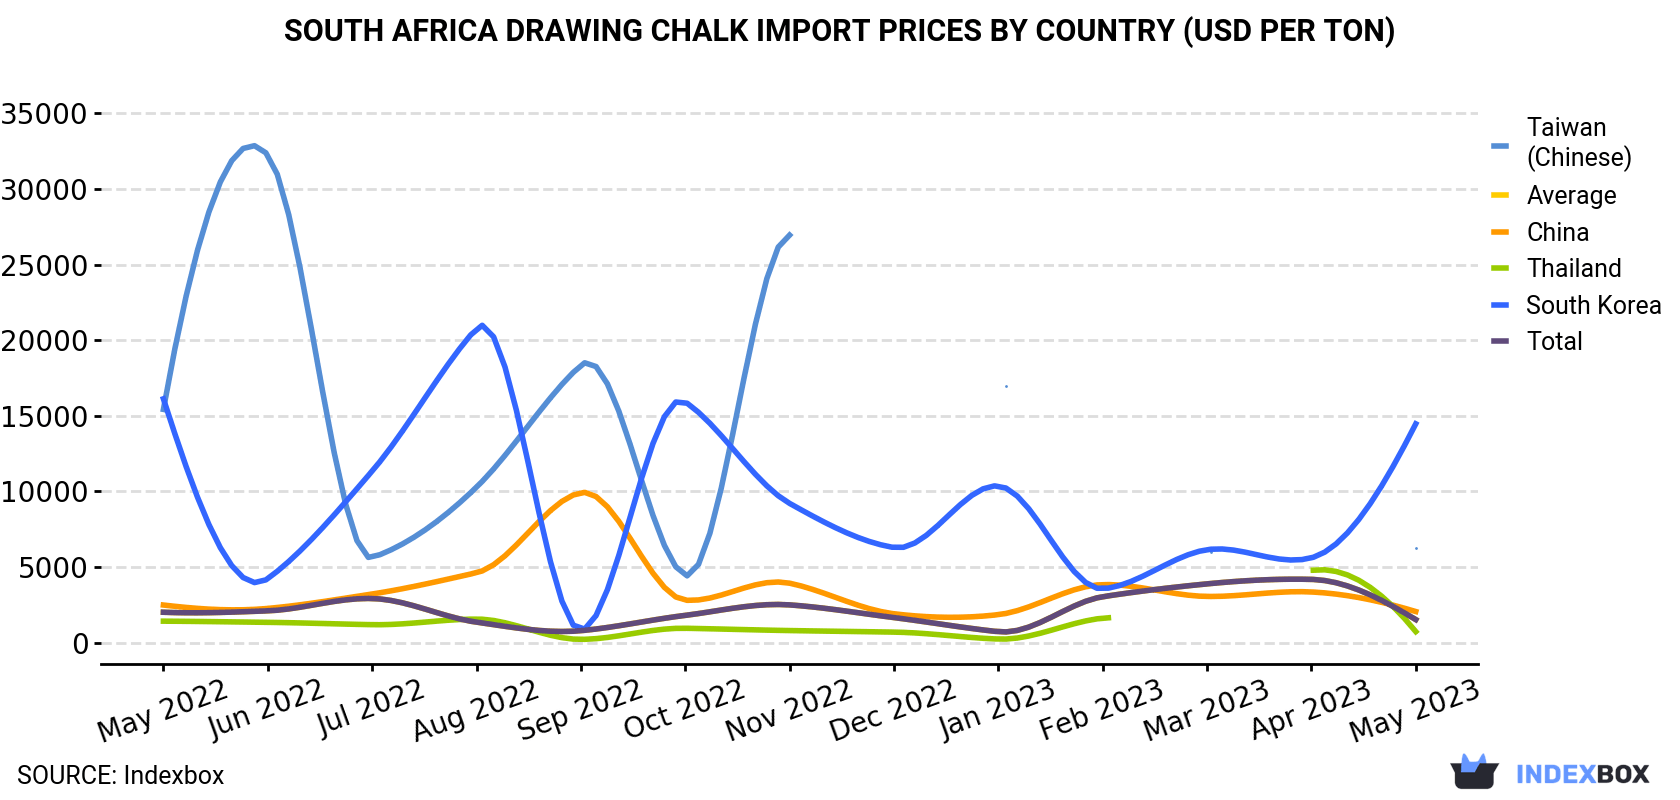 South Africa Drawing Chalk Import Prices By Country (USD Per Ton)